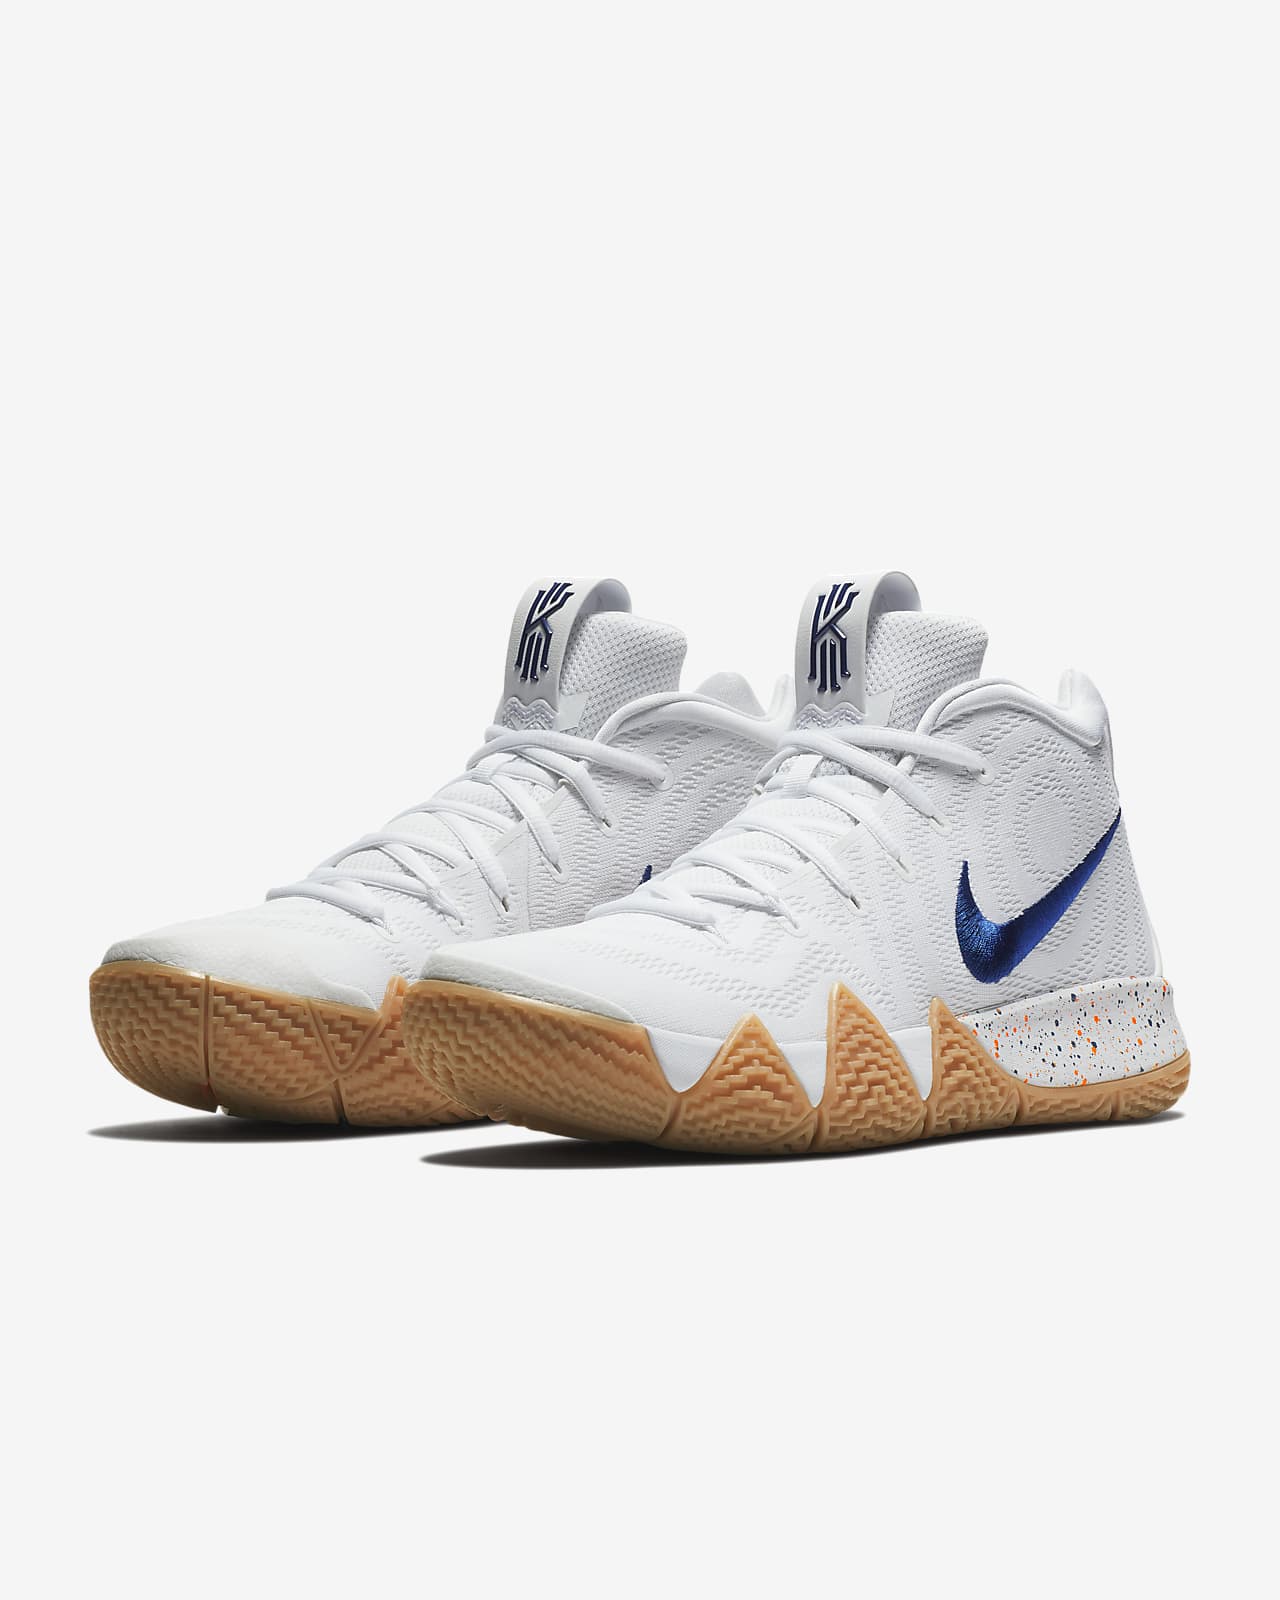 kyrie 4 price in india